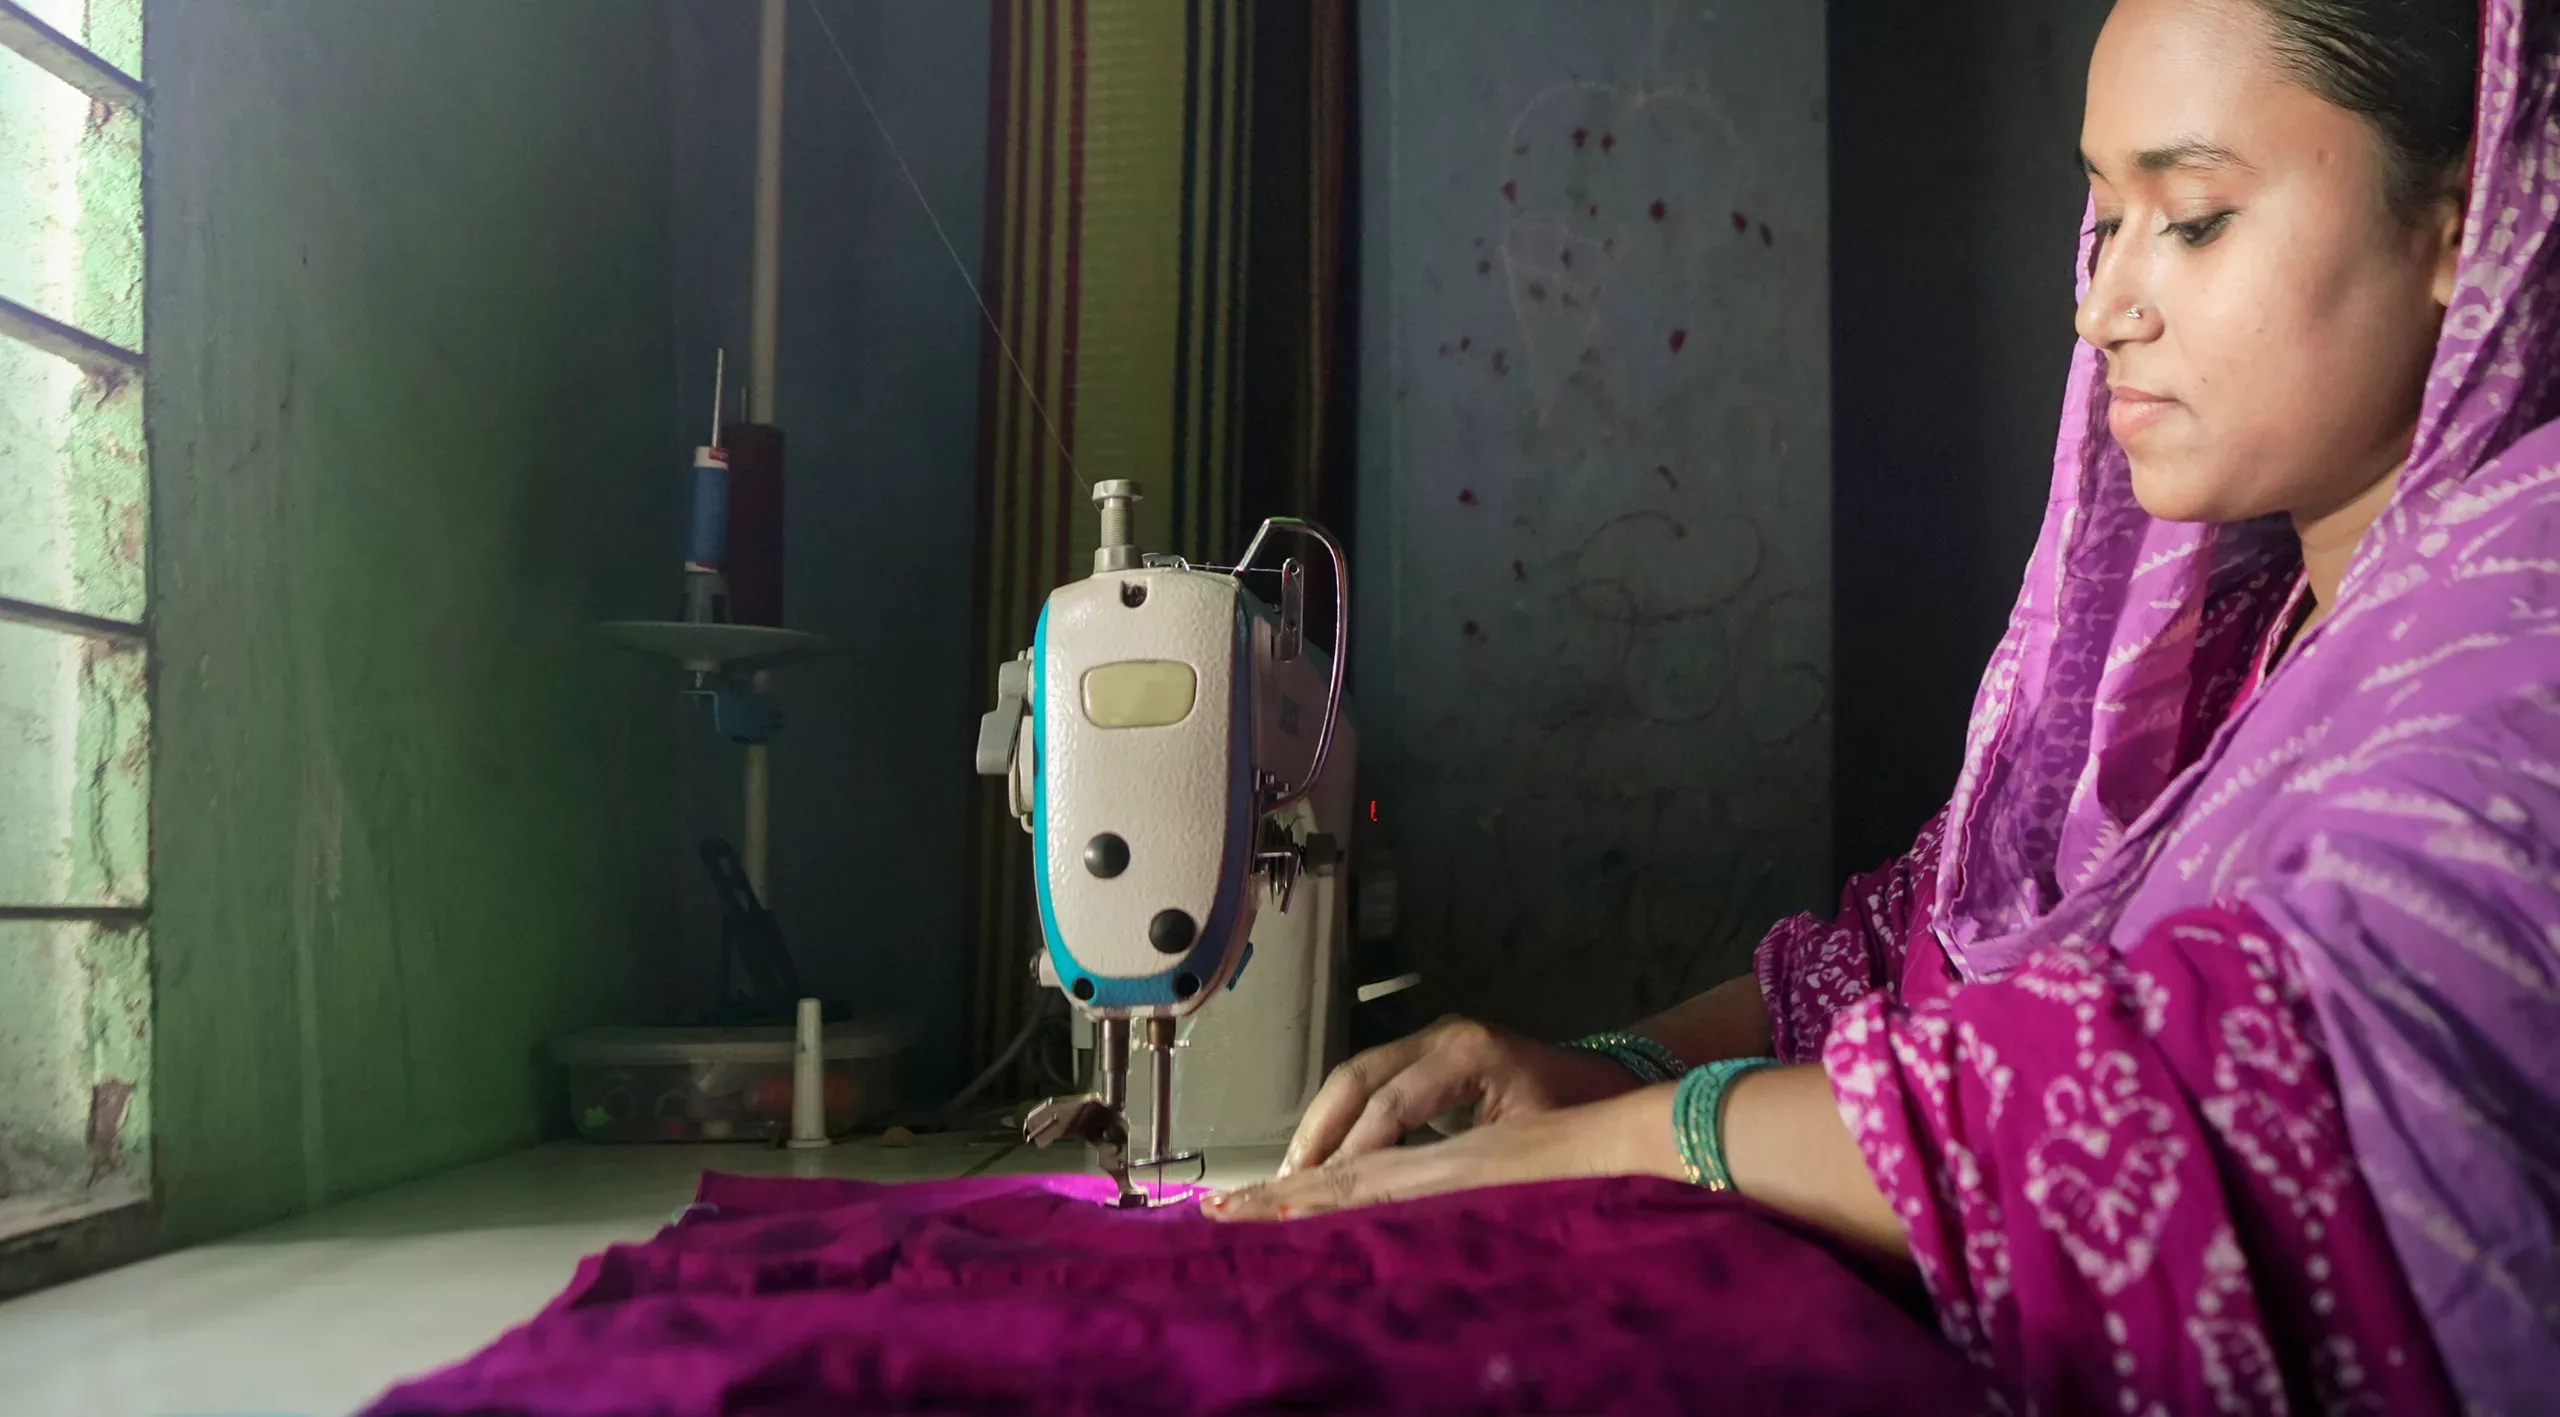 Ruma Akter sits while using her sewing machine. She is inside her home in front of a large window.